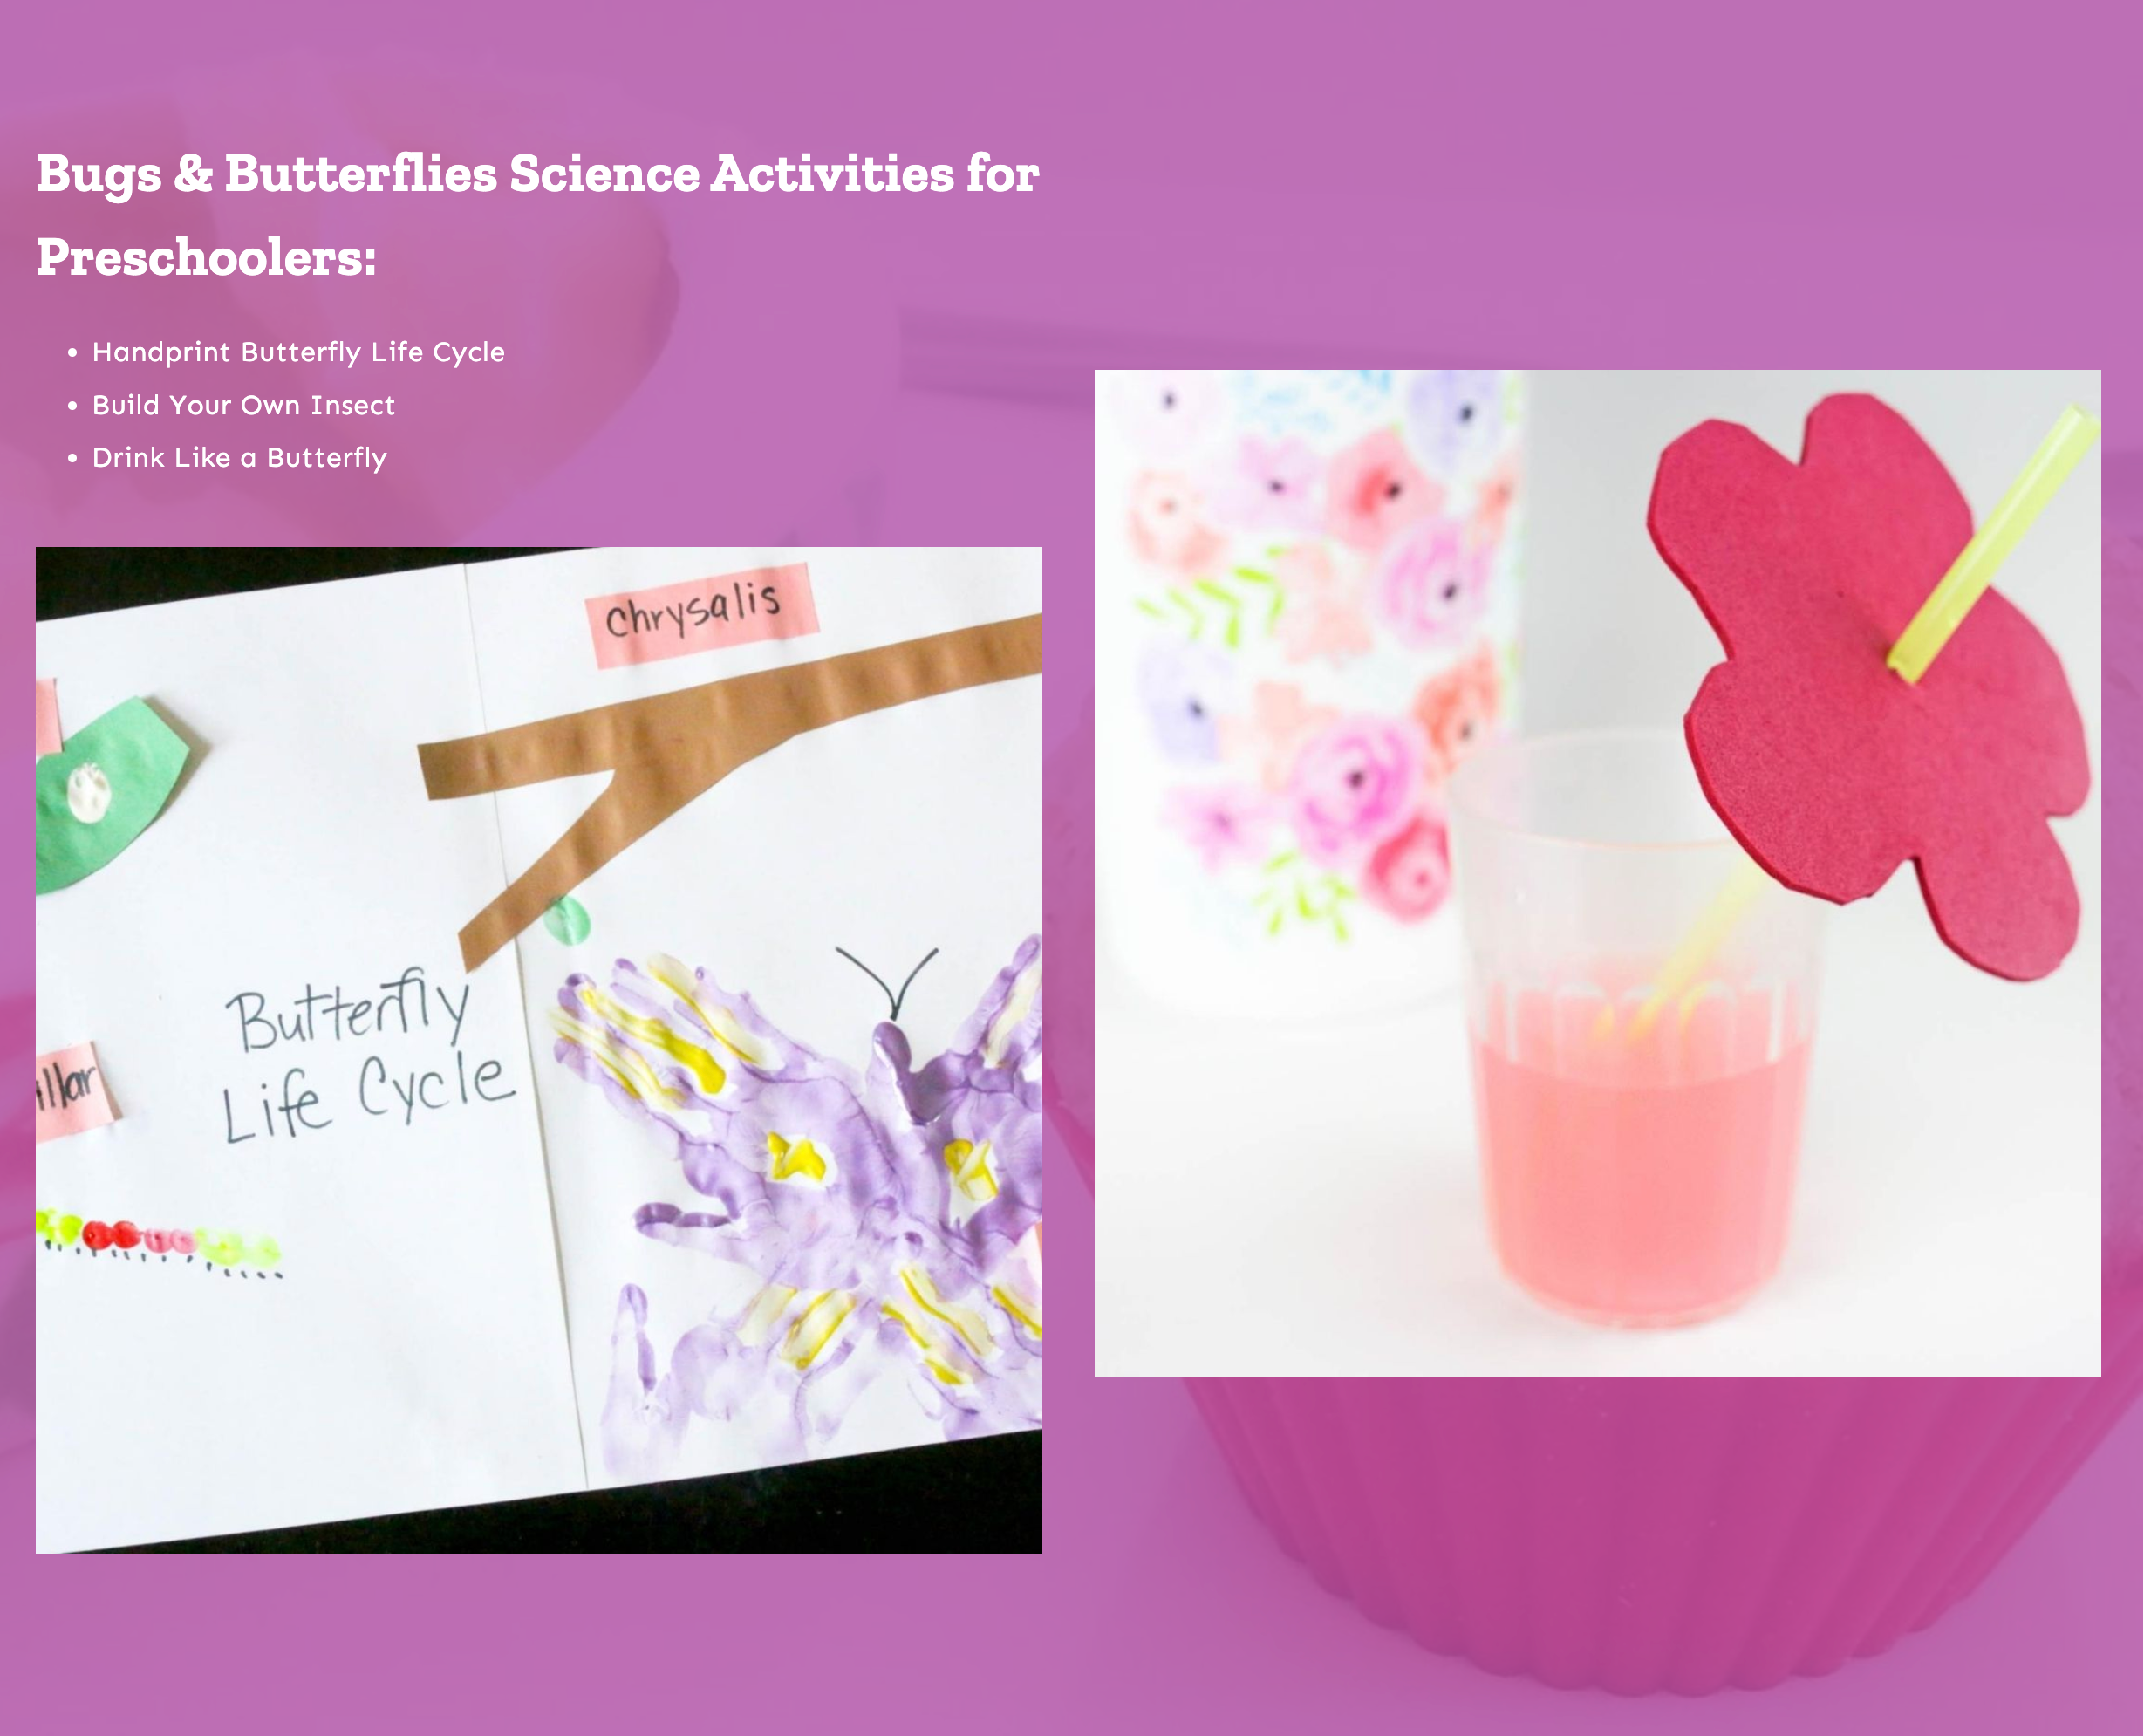 list of bugs and butterflies science activities